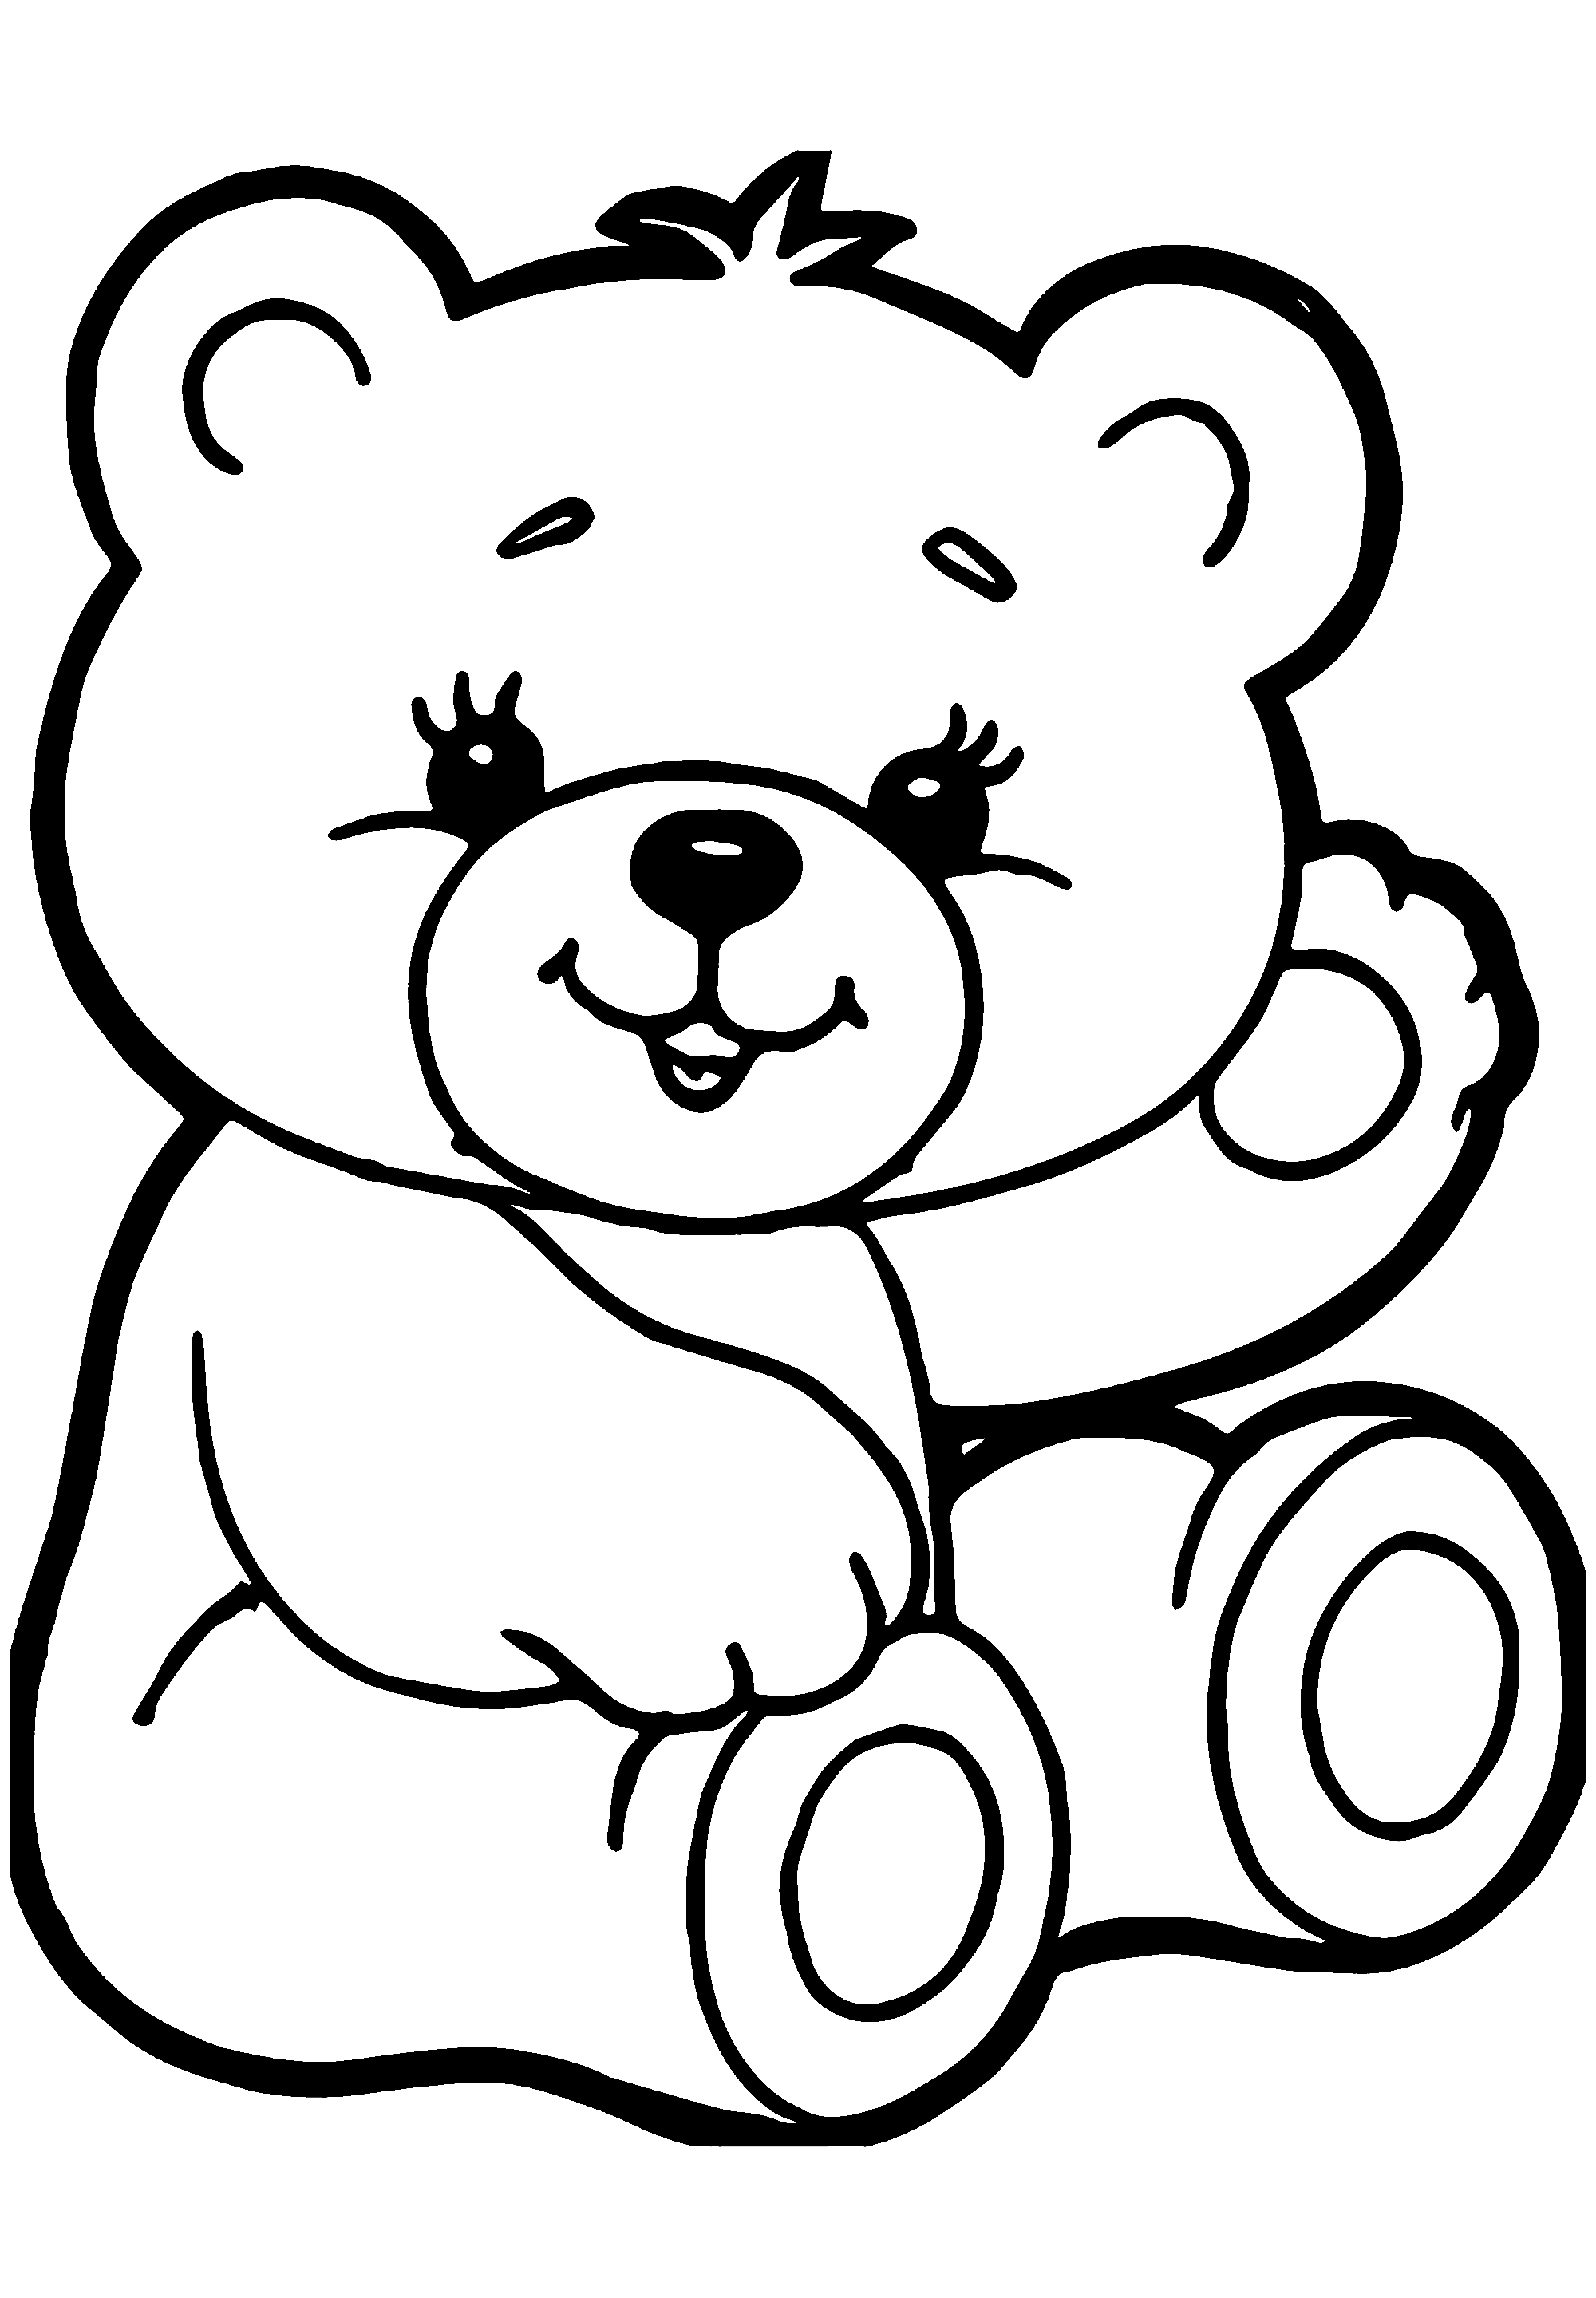 Teddy Bear Template Coloring Pages